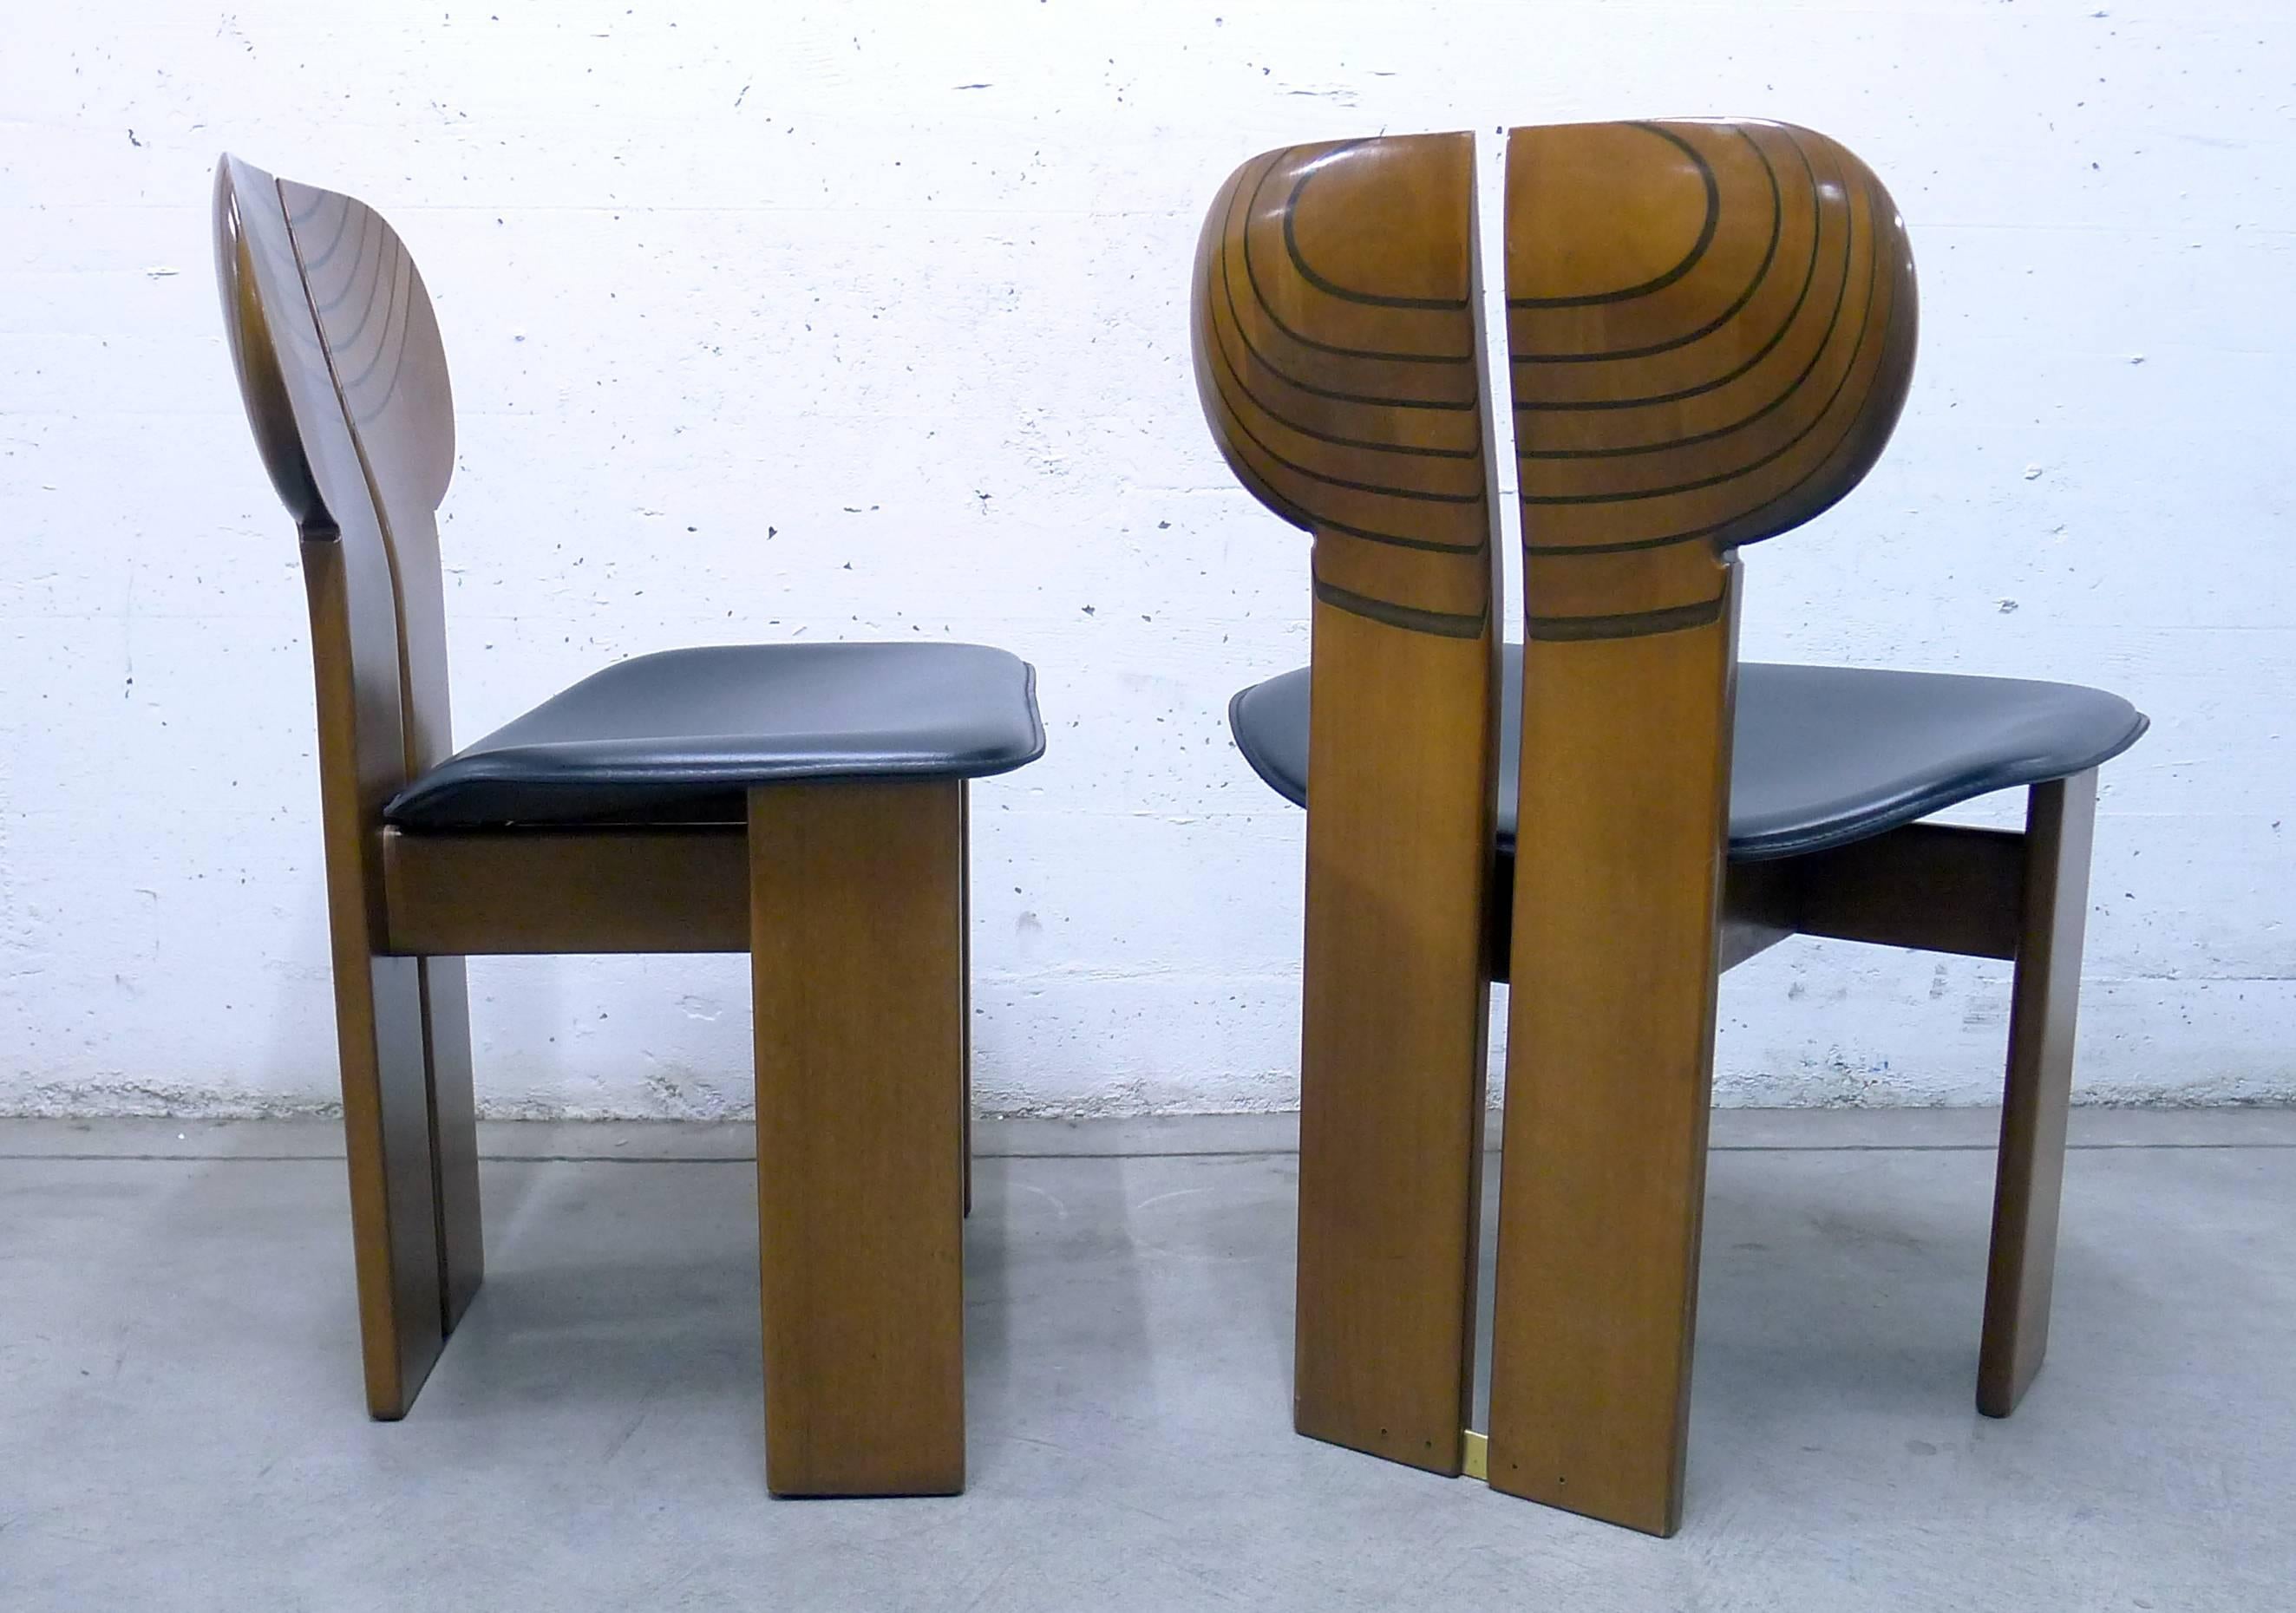 20th Century Pair of Africa Chairs by Afra and Tobia Scarpa, Maxalto Artona Series